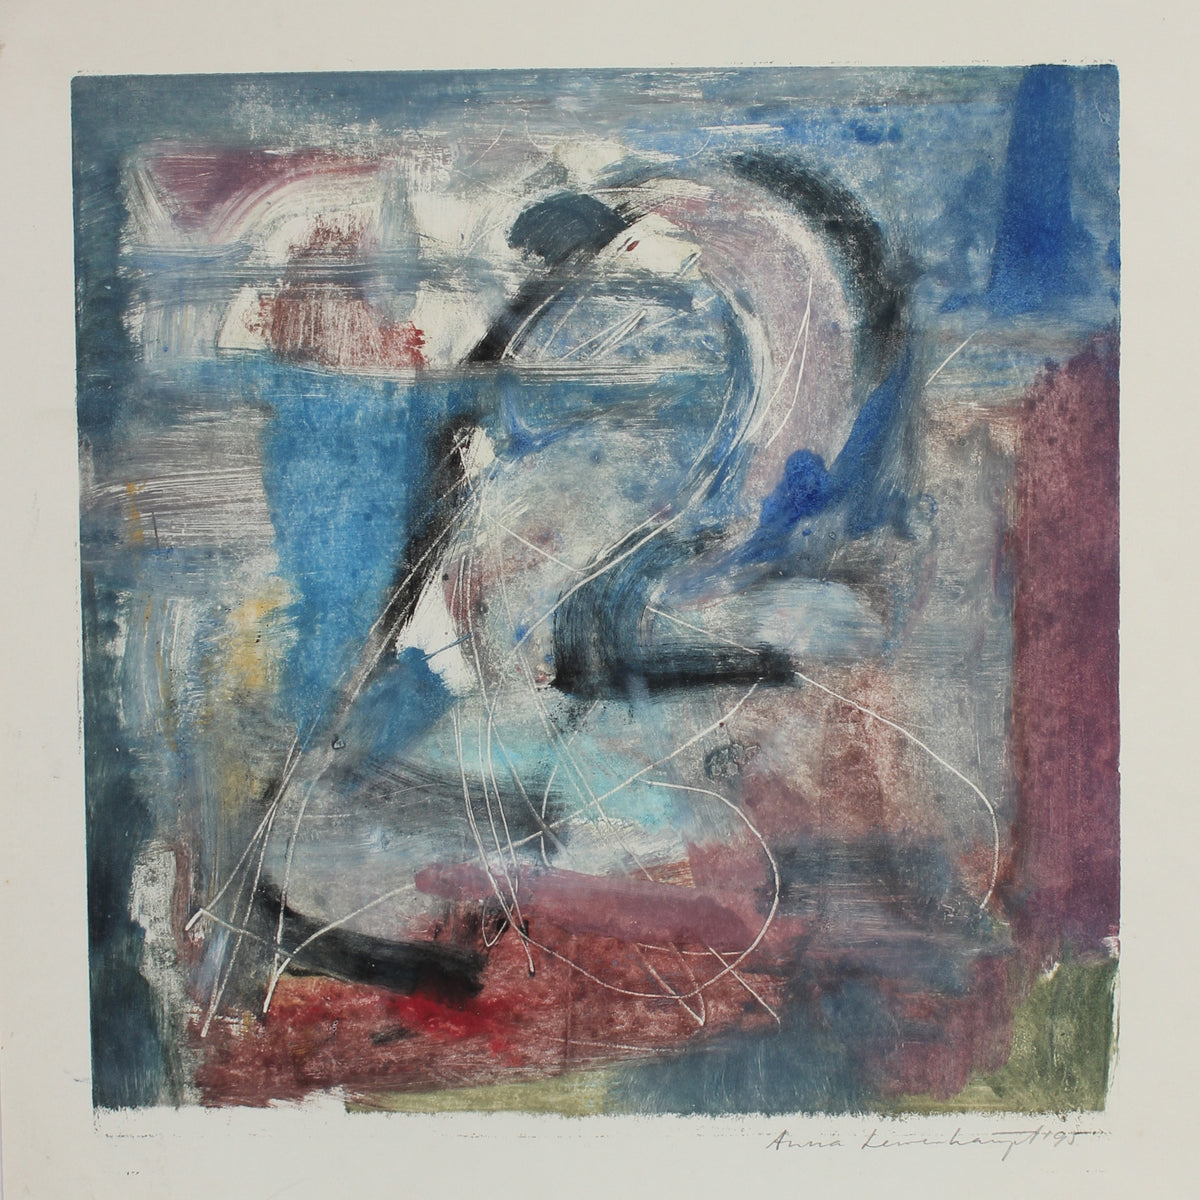 Muted Abstracted Color Study&lt;br&gt;1995 Mixed Media Monotype&lt;br&gt;&lt;br&gt;#99164